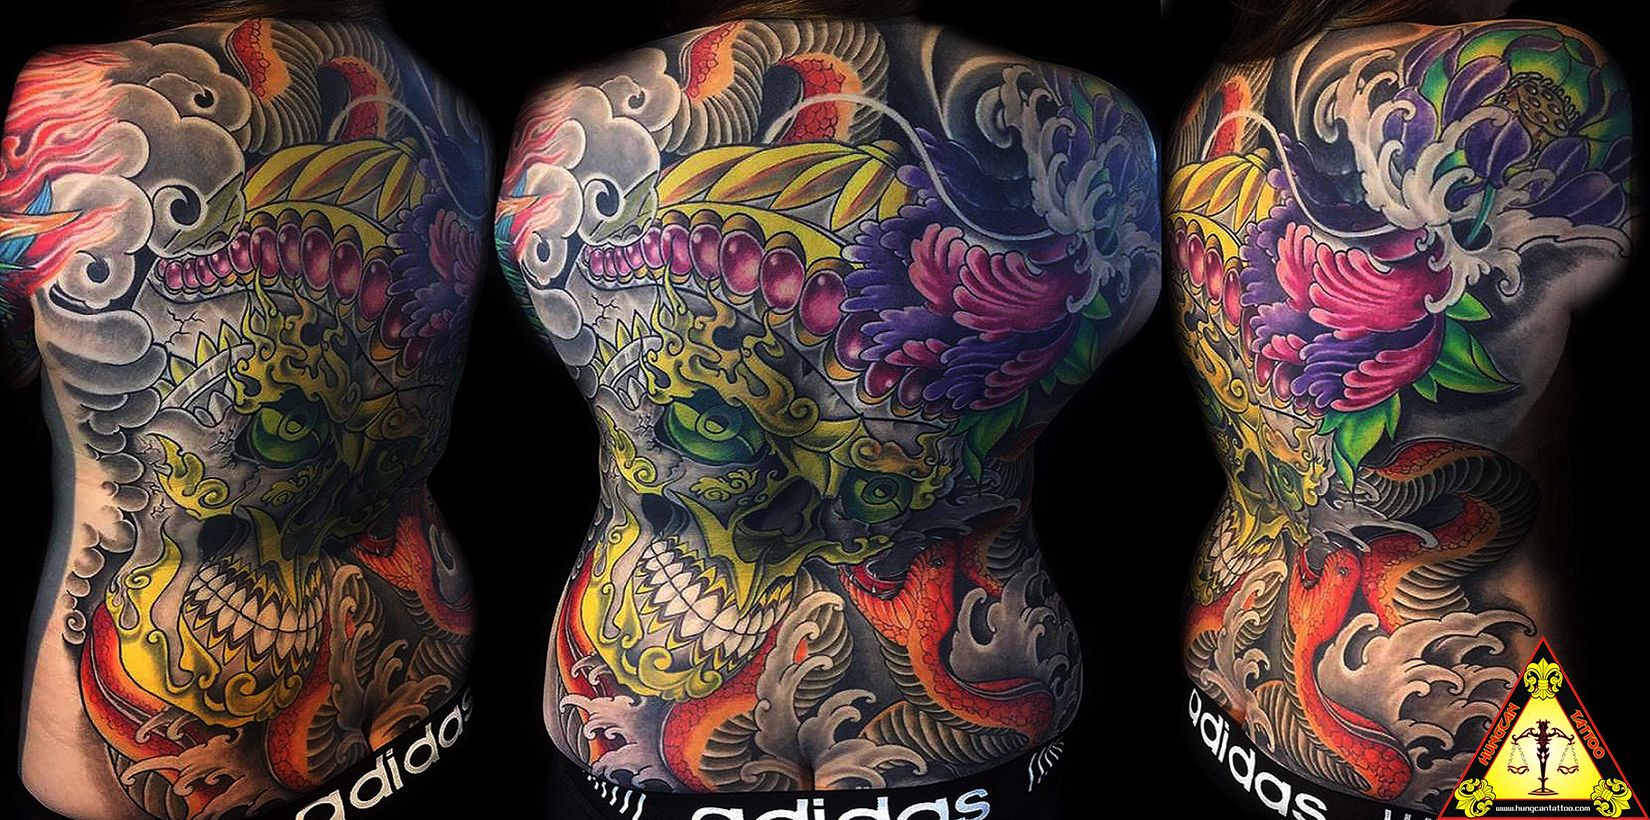 Tải xuống APK Cb Background Tattoo Png For Editing CbTattoo cho Android